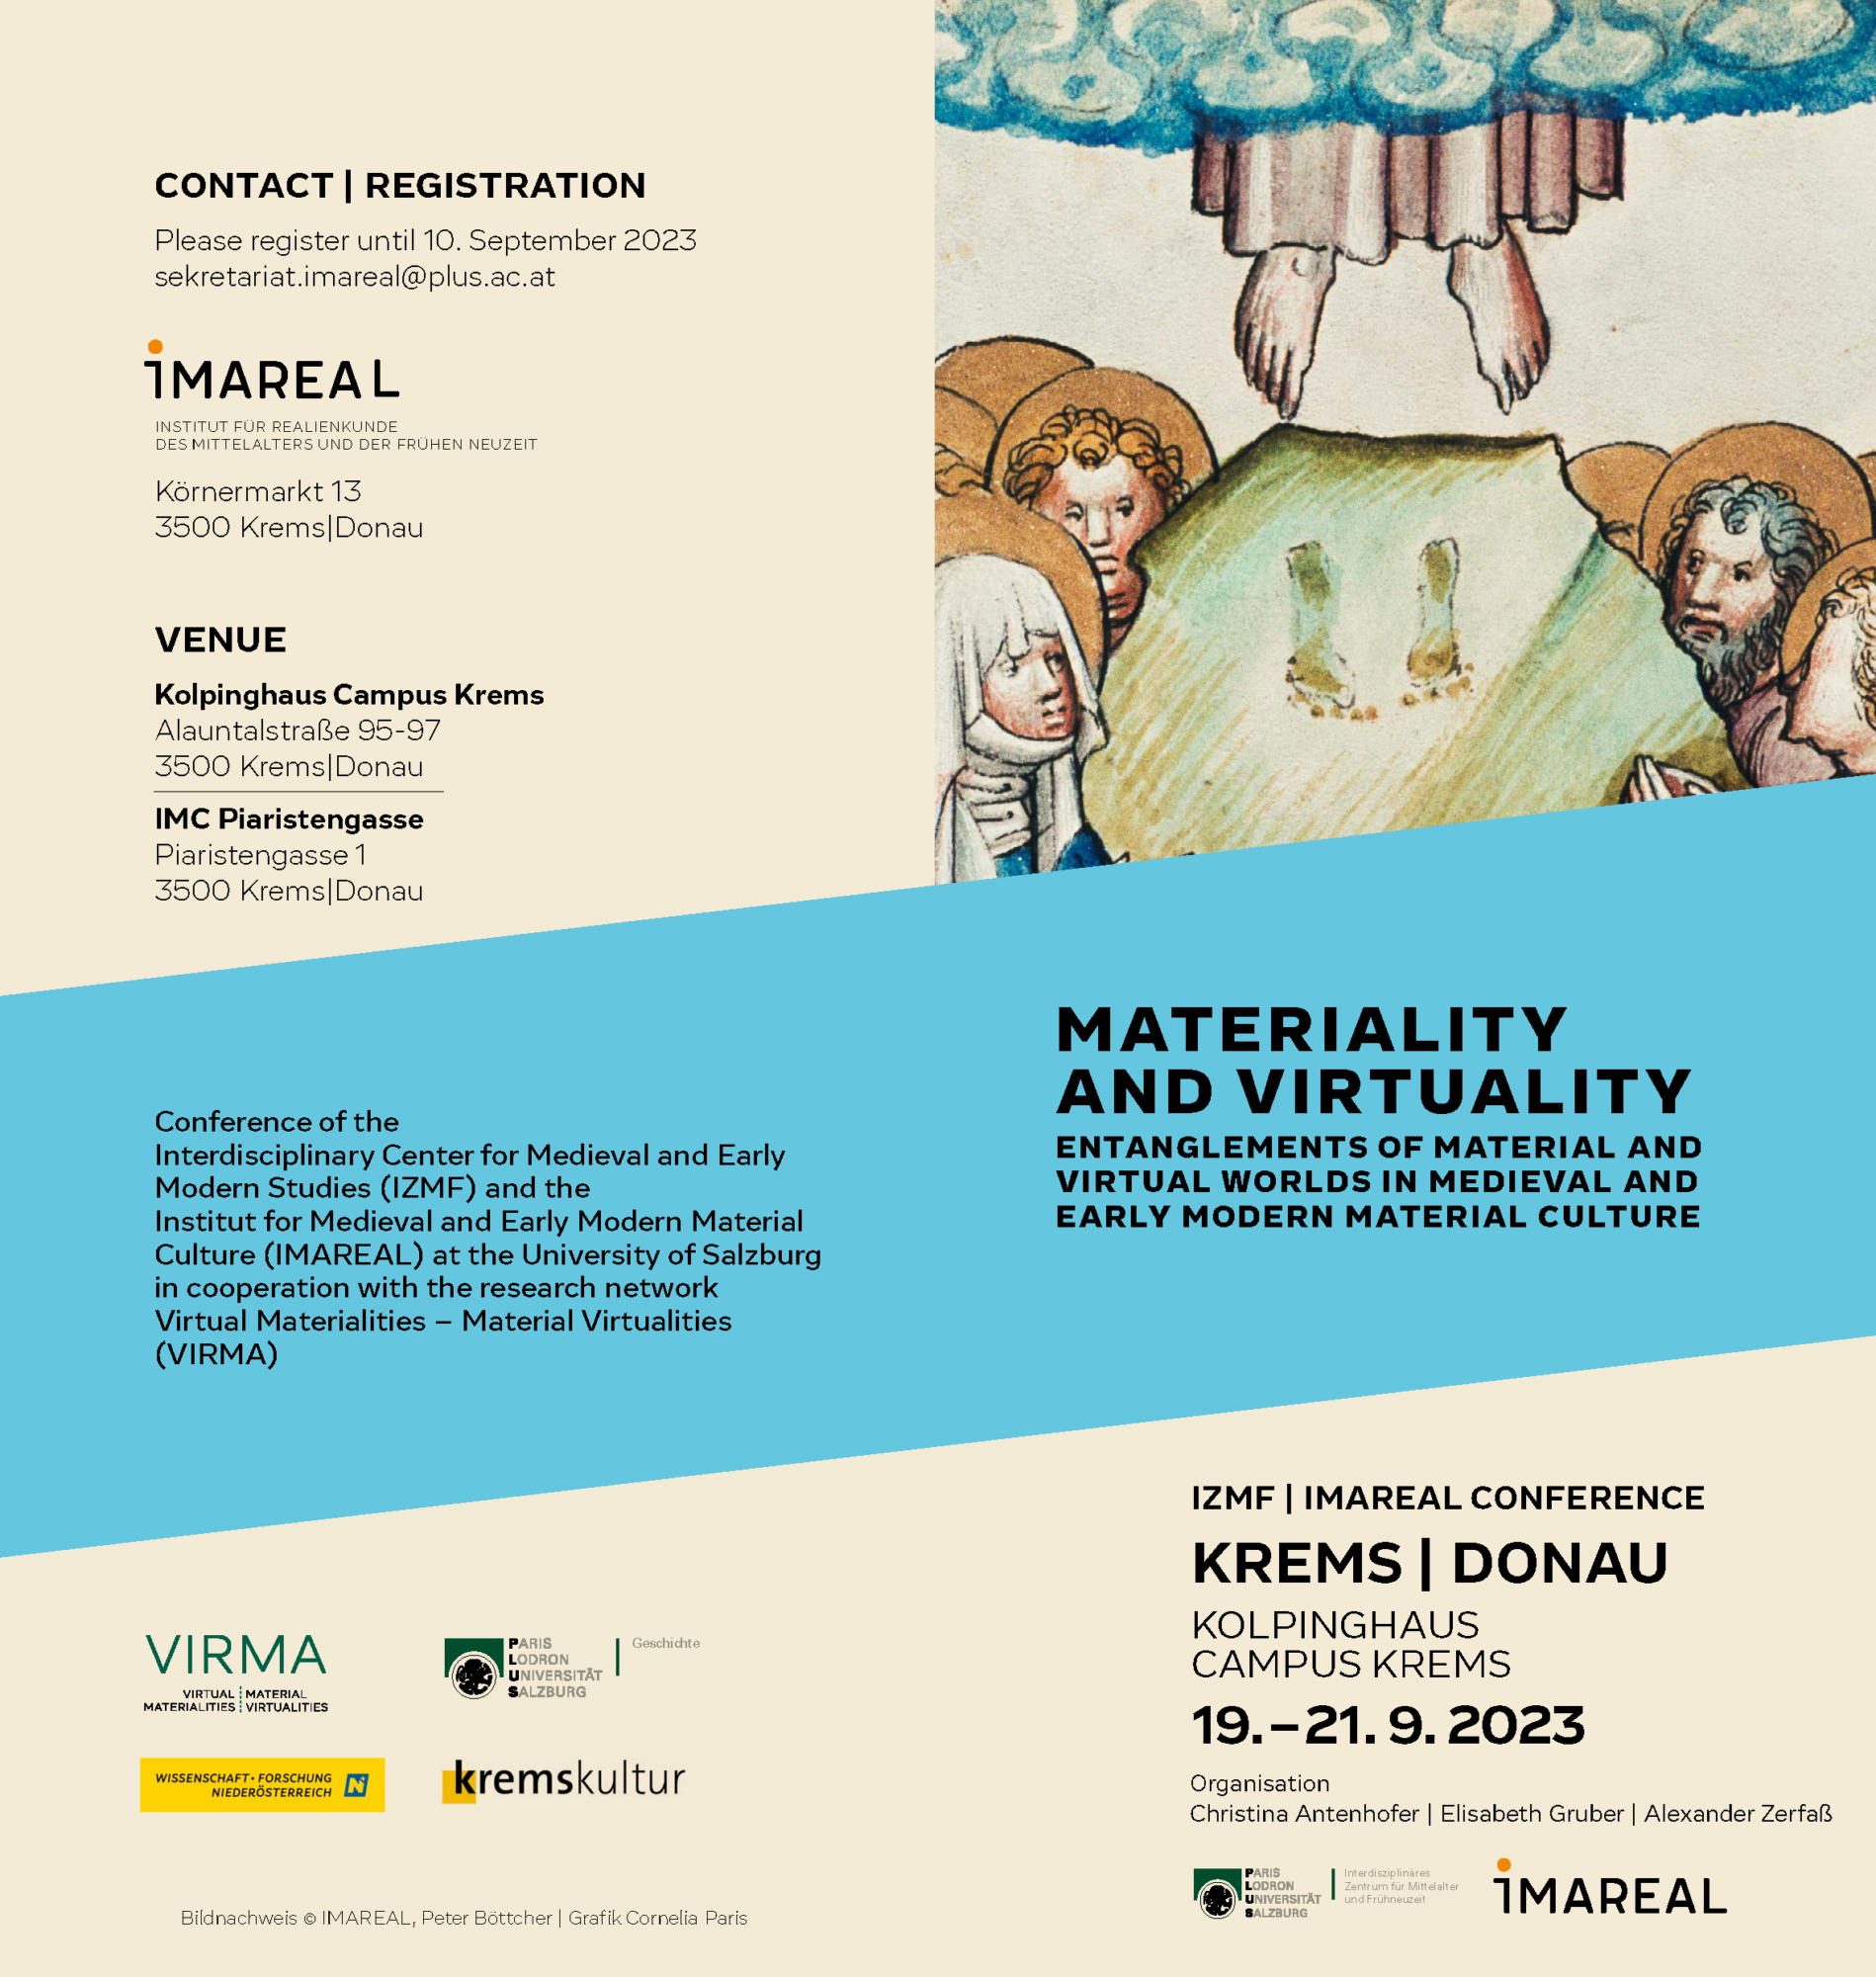 Conference "MATERIALITY AND VIRTUALITY"